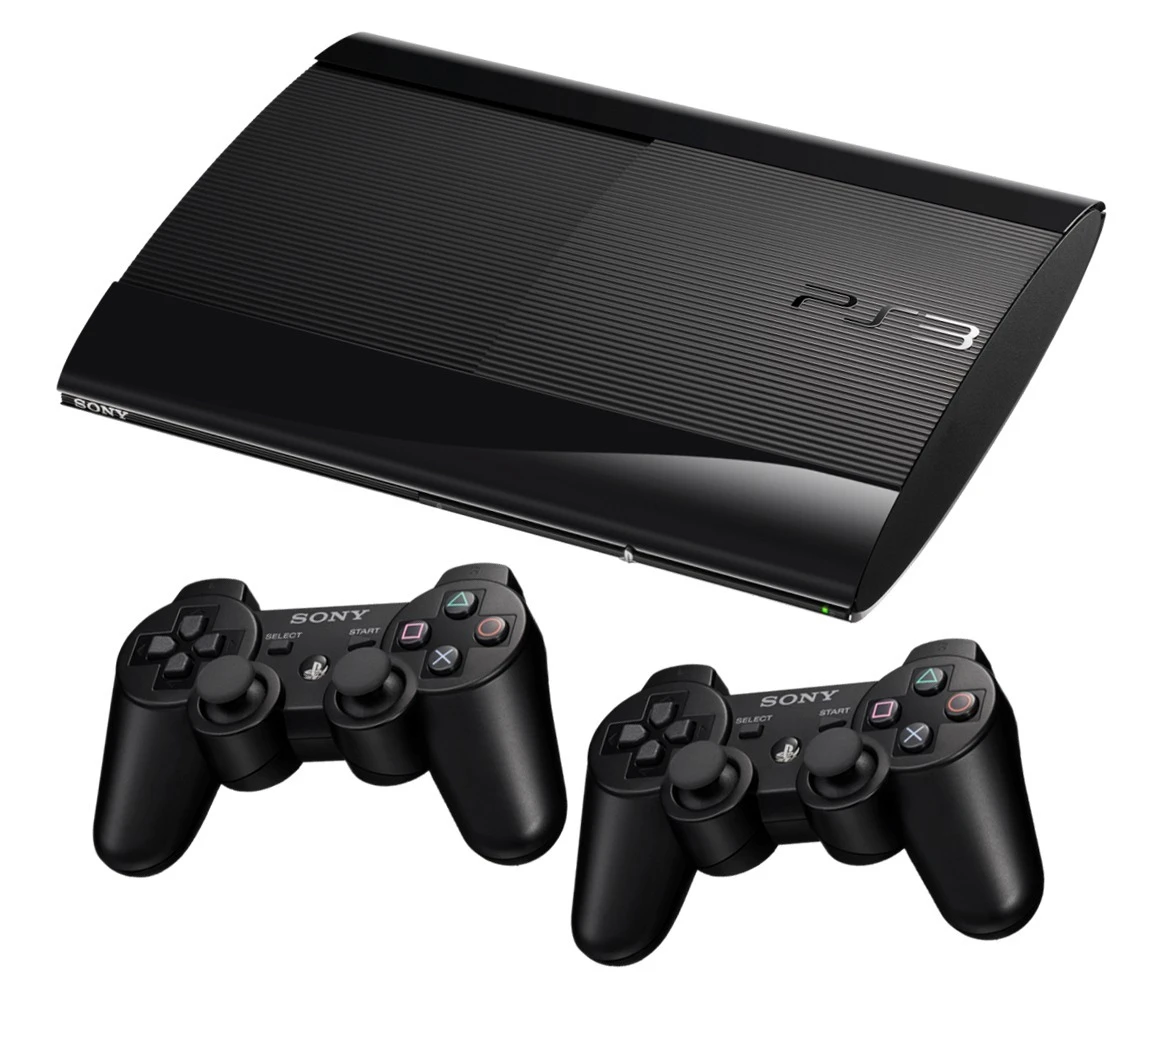 Predict according to Turkey Sony PS3 game console PlayStation 3 500GB + 50 games used| | - AliExpress